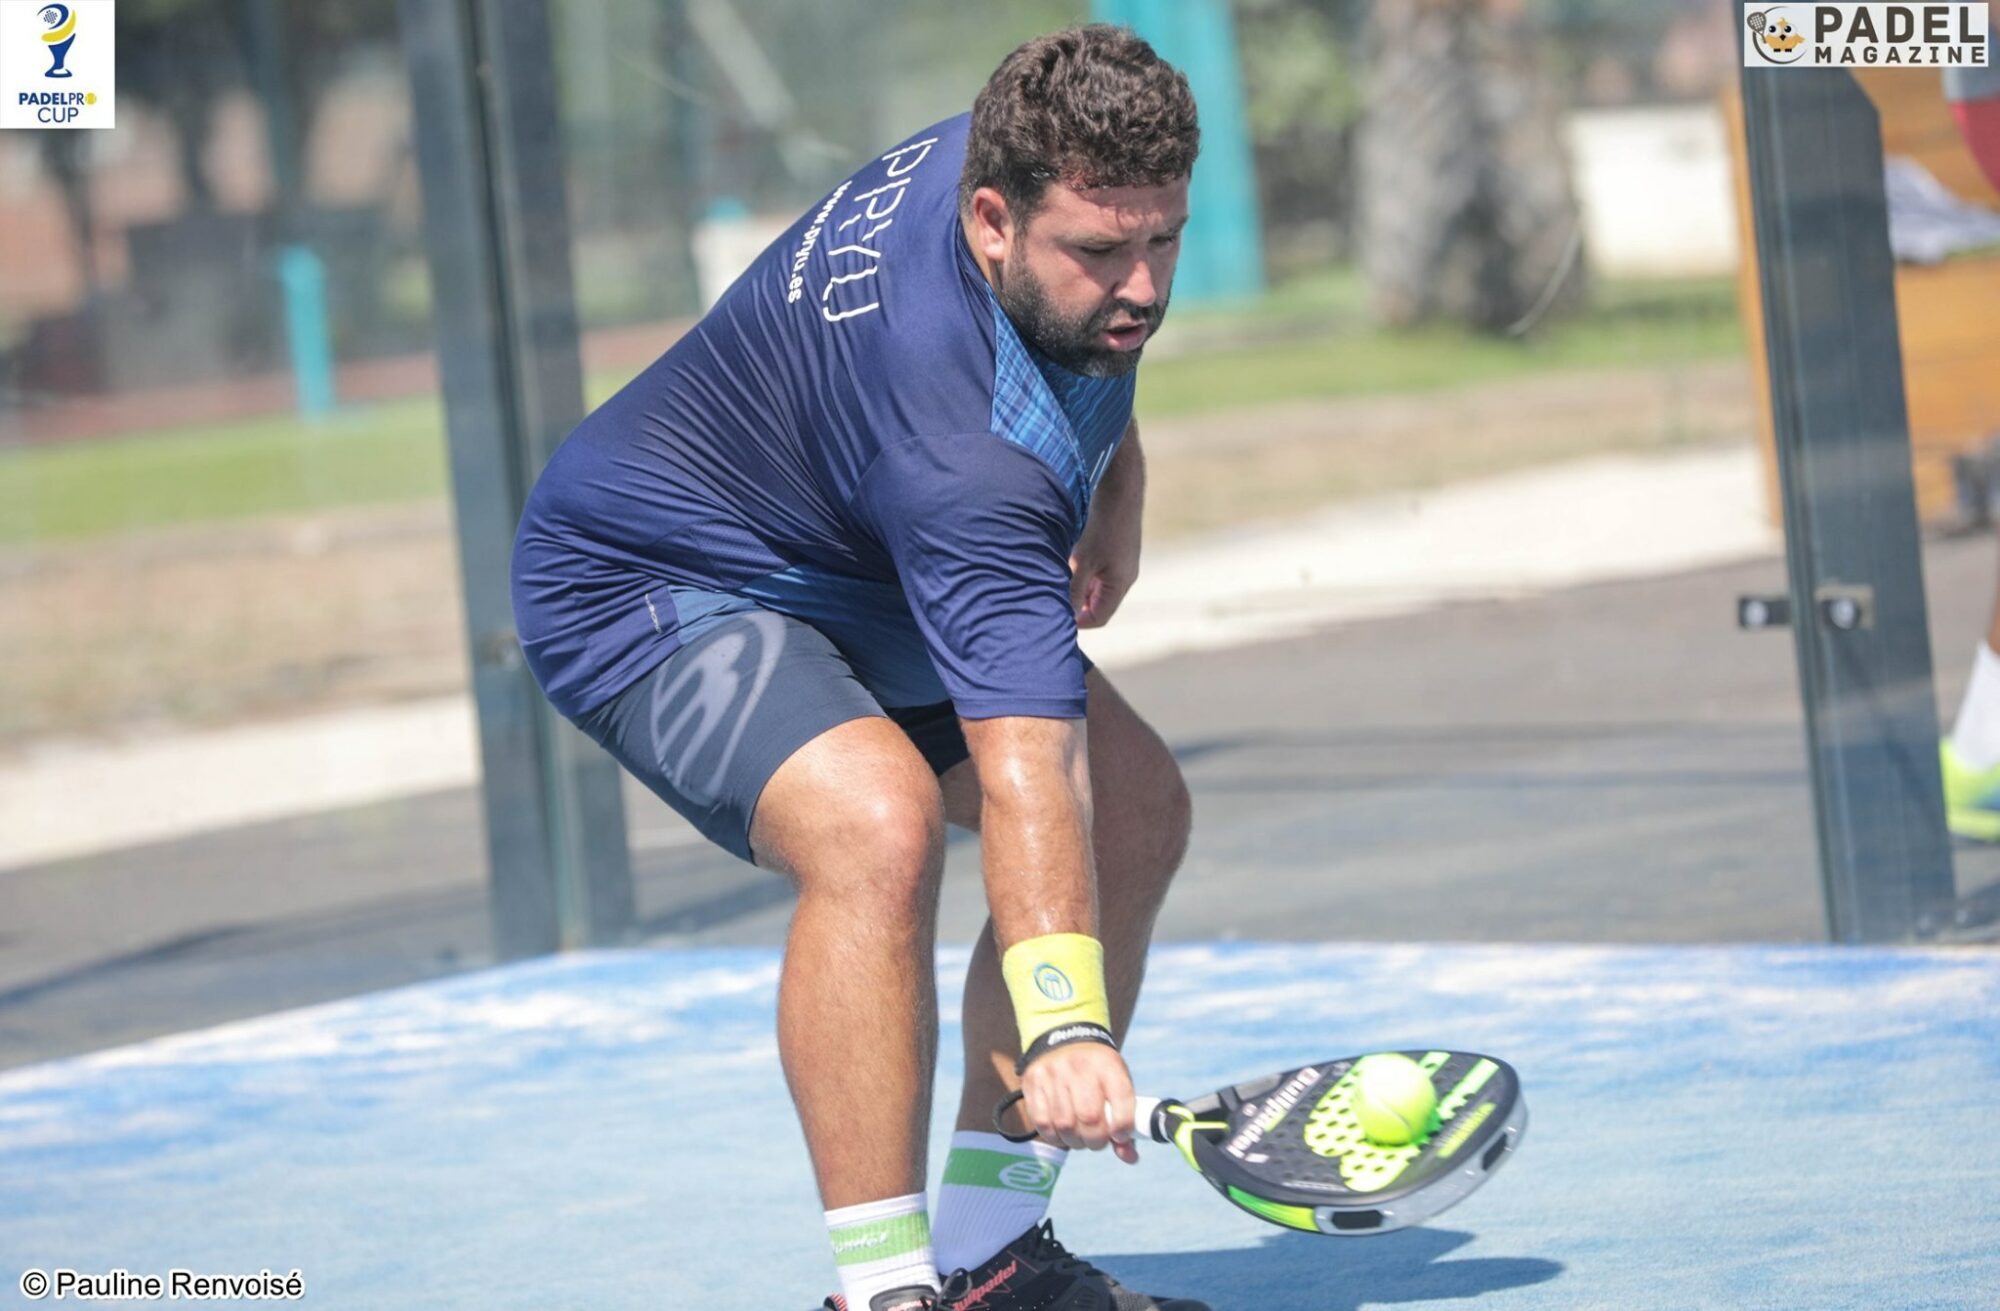 Tactical padel : what to do during a short ball?